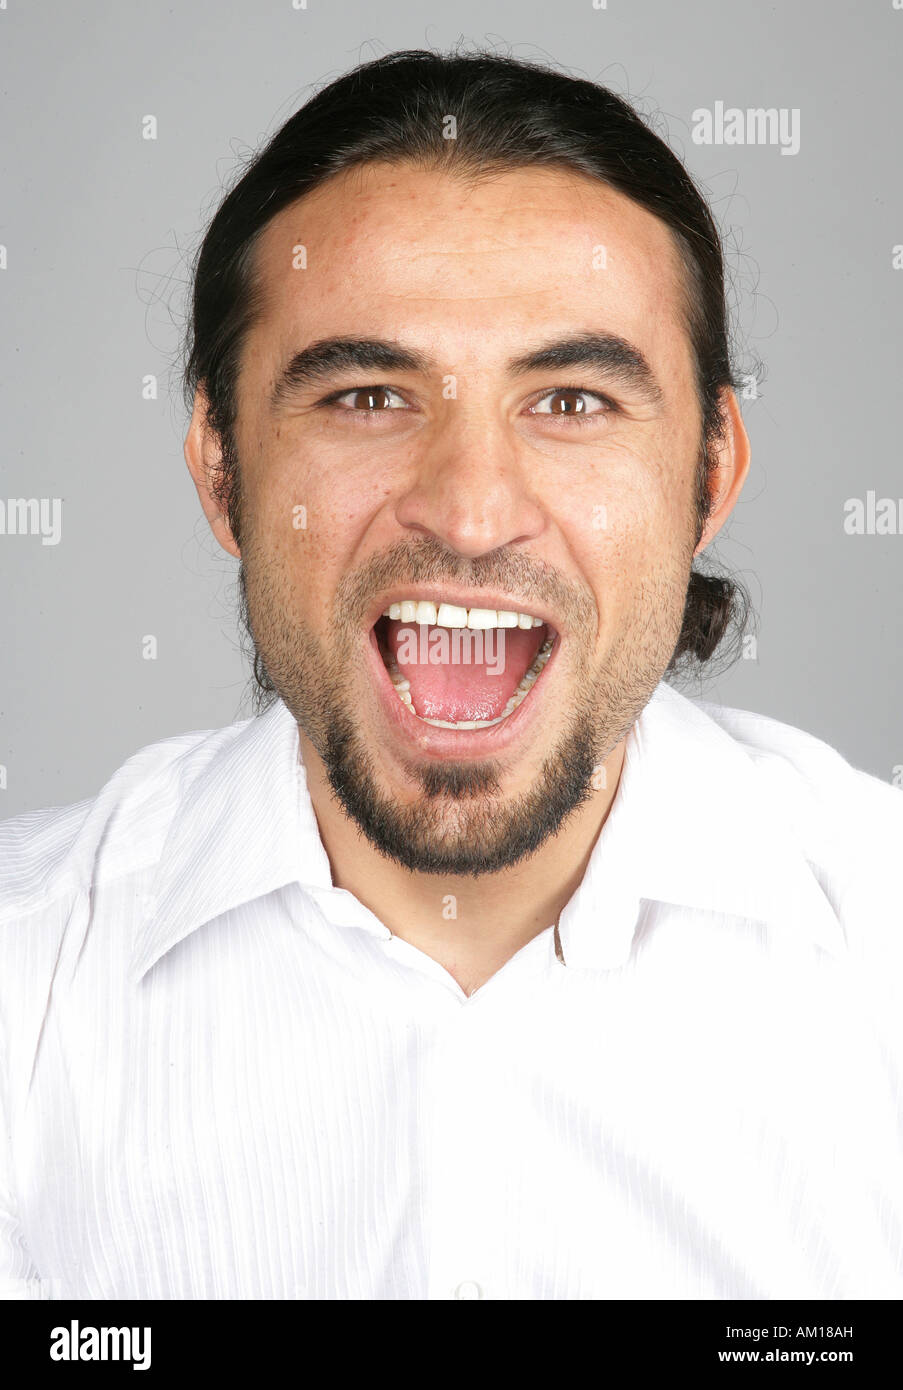 Portrait of a man, laughing Stock Photo